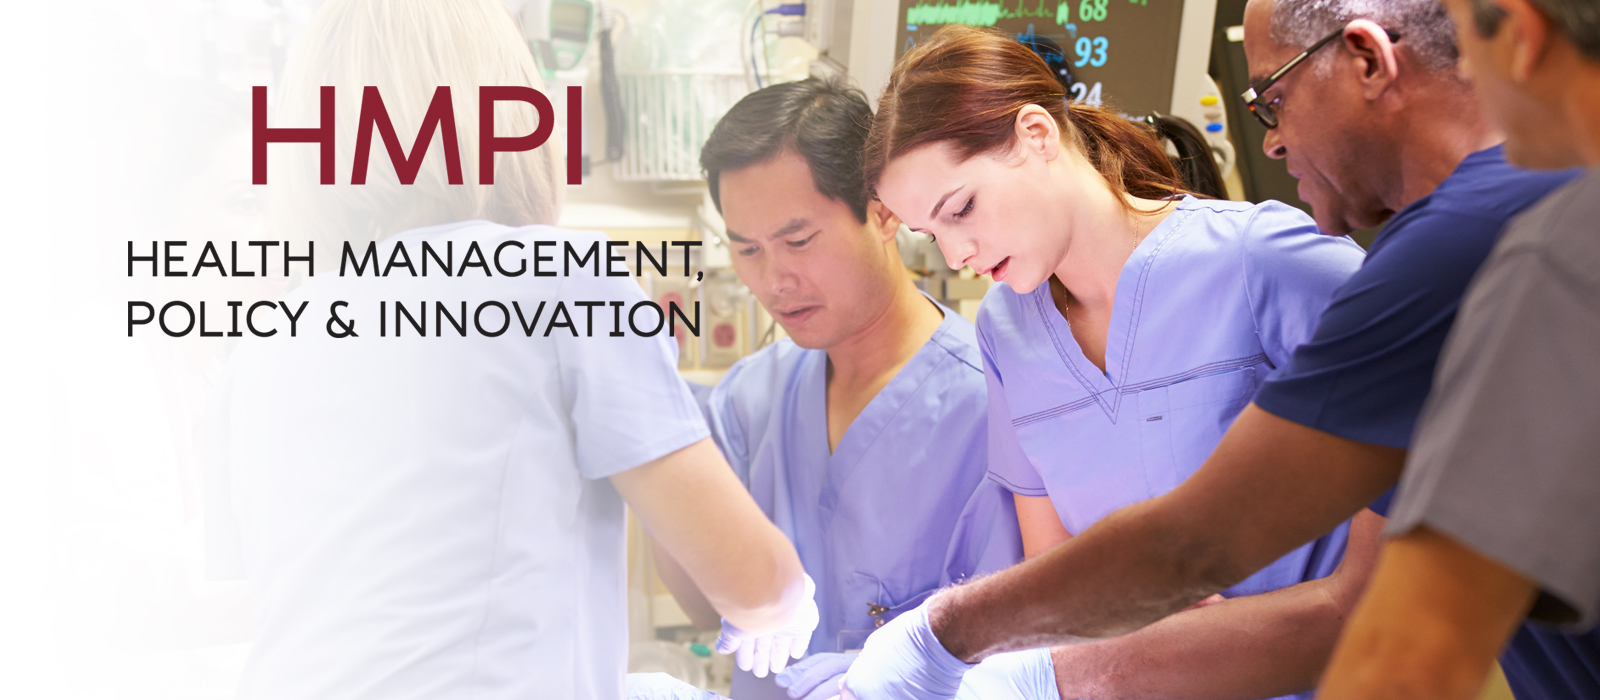 Introducing the New Issue of Health Management, Policy and Innovation